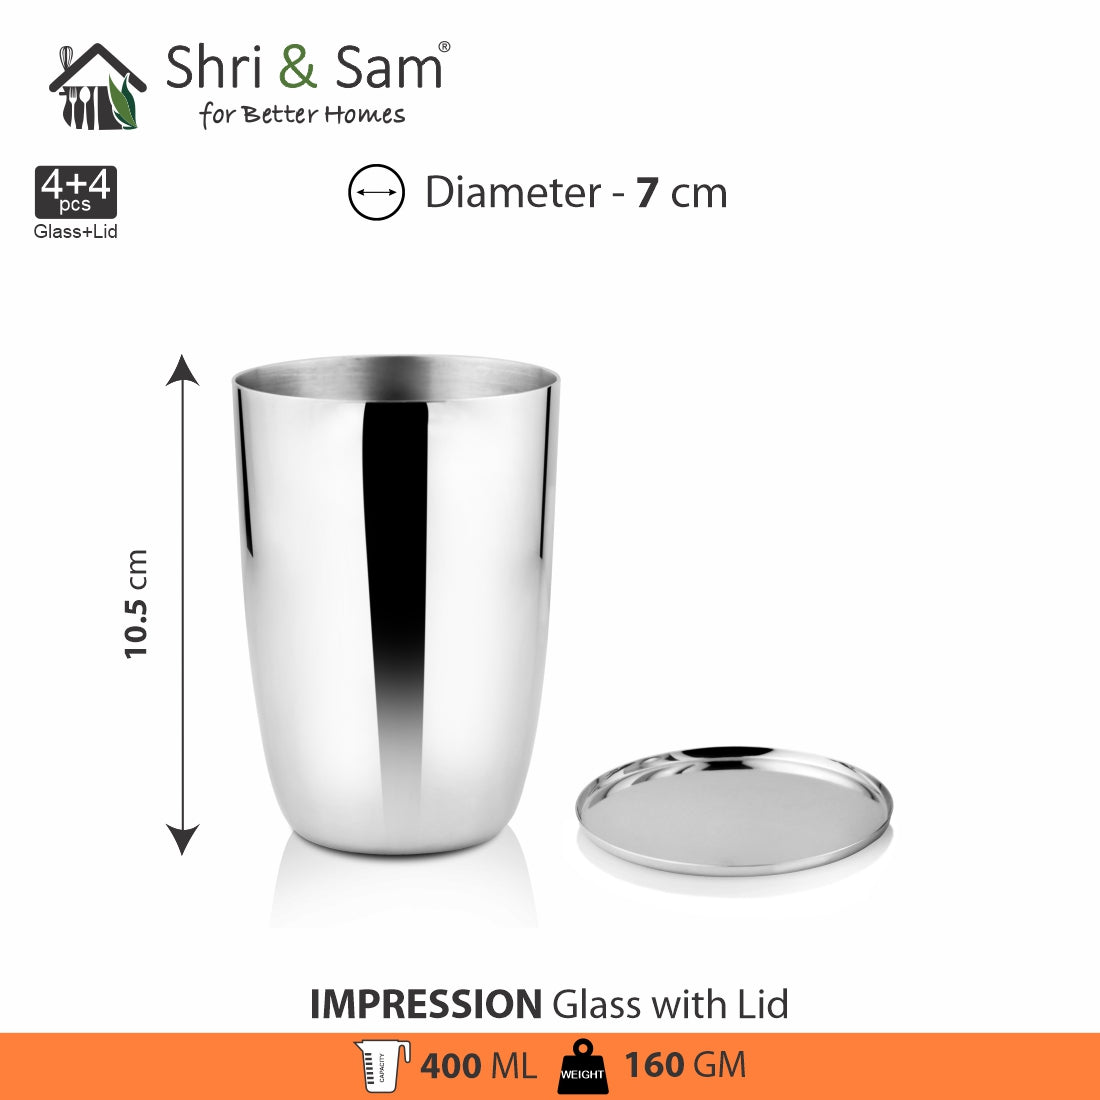 Stainless Steel 4 PCS Glass with SS Lid Impression